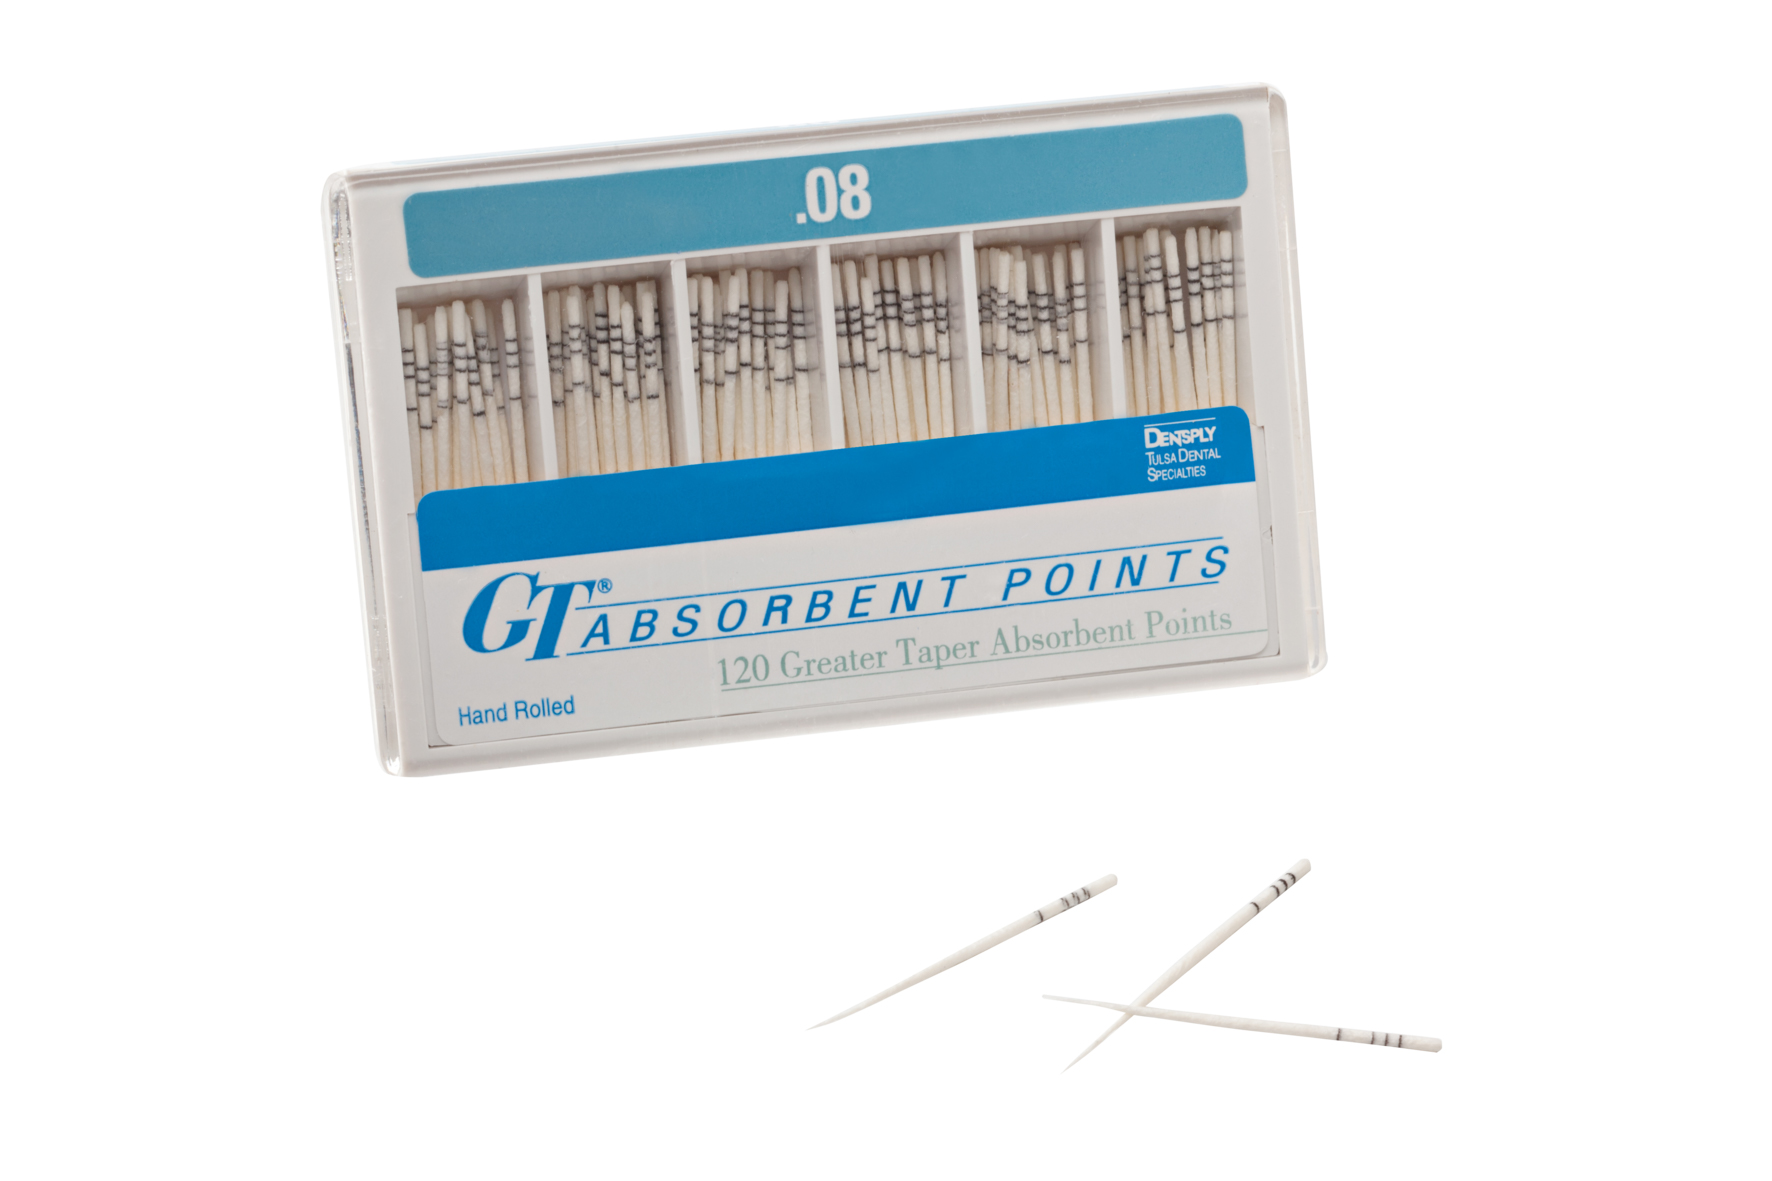 GT Absorbent Points